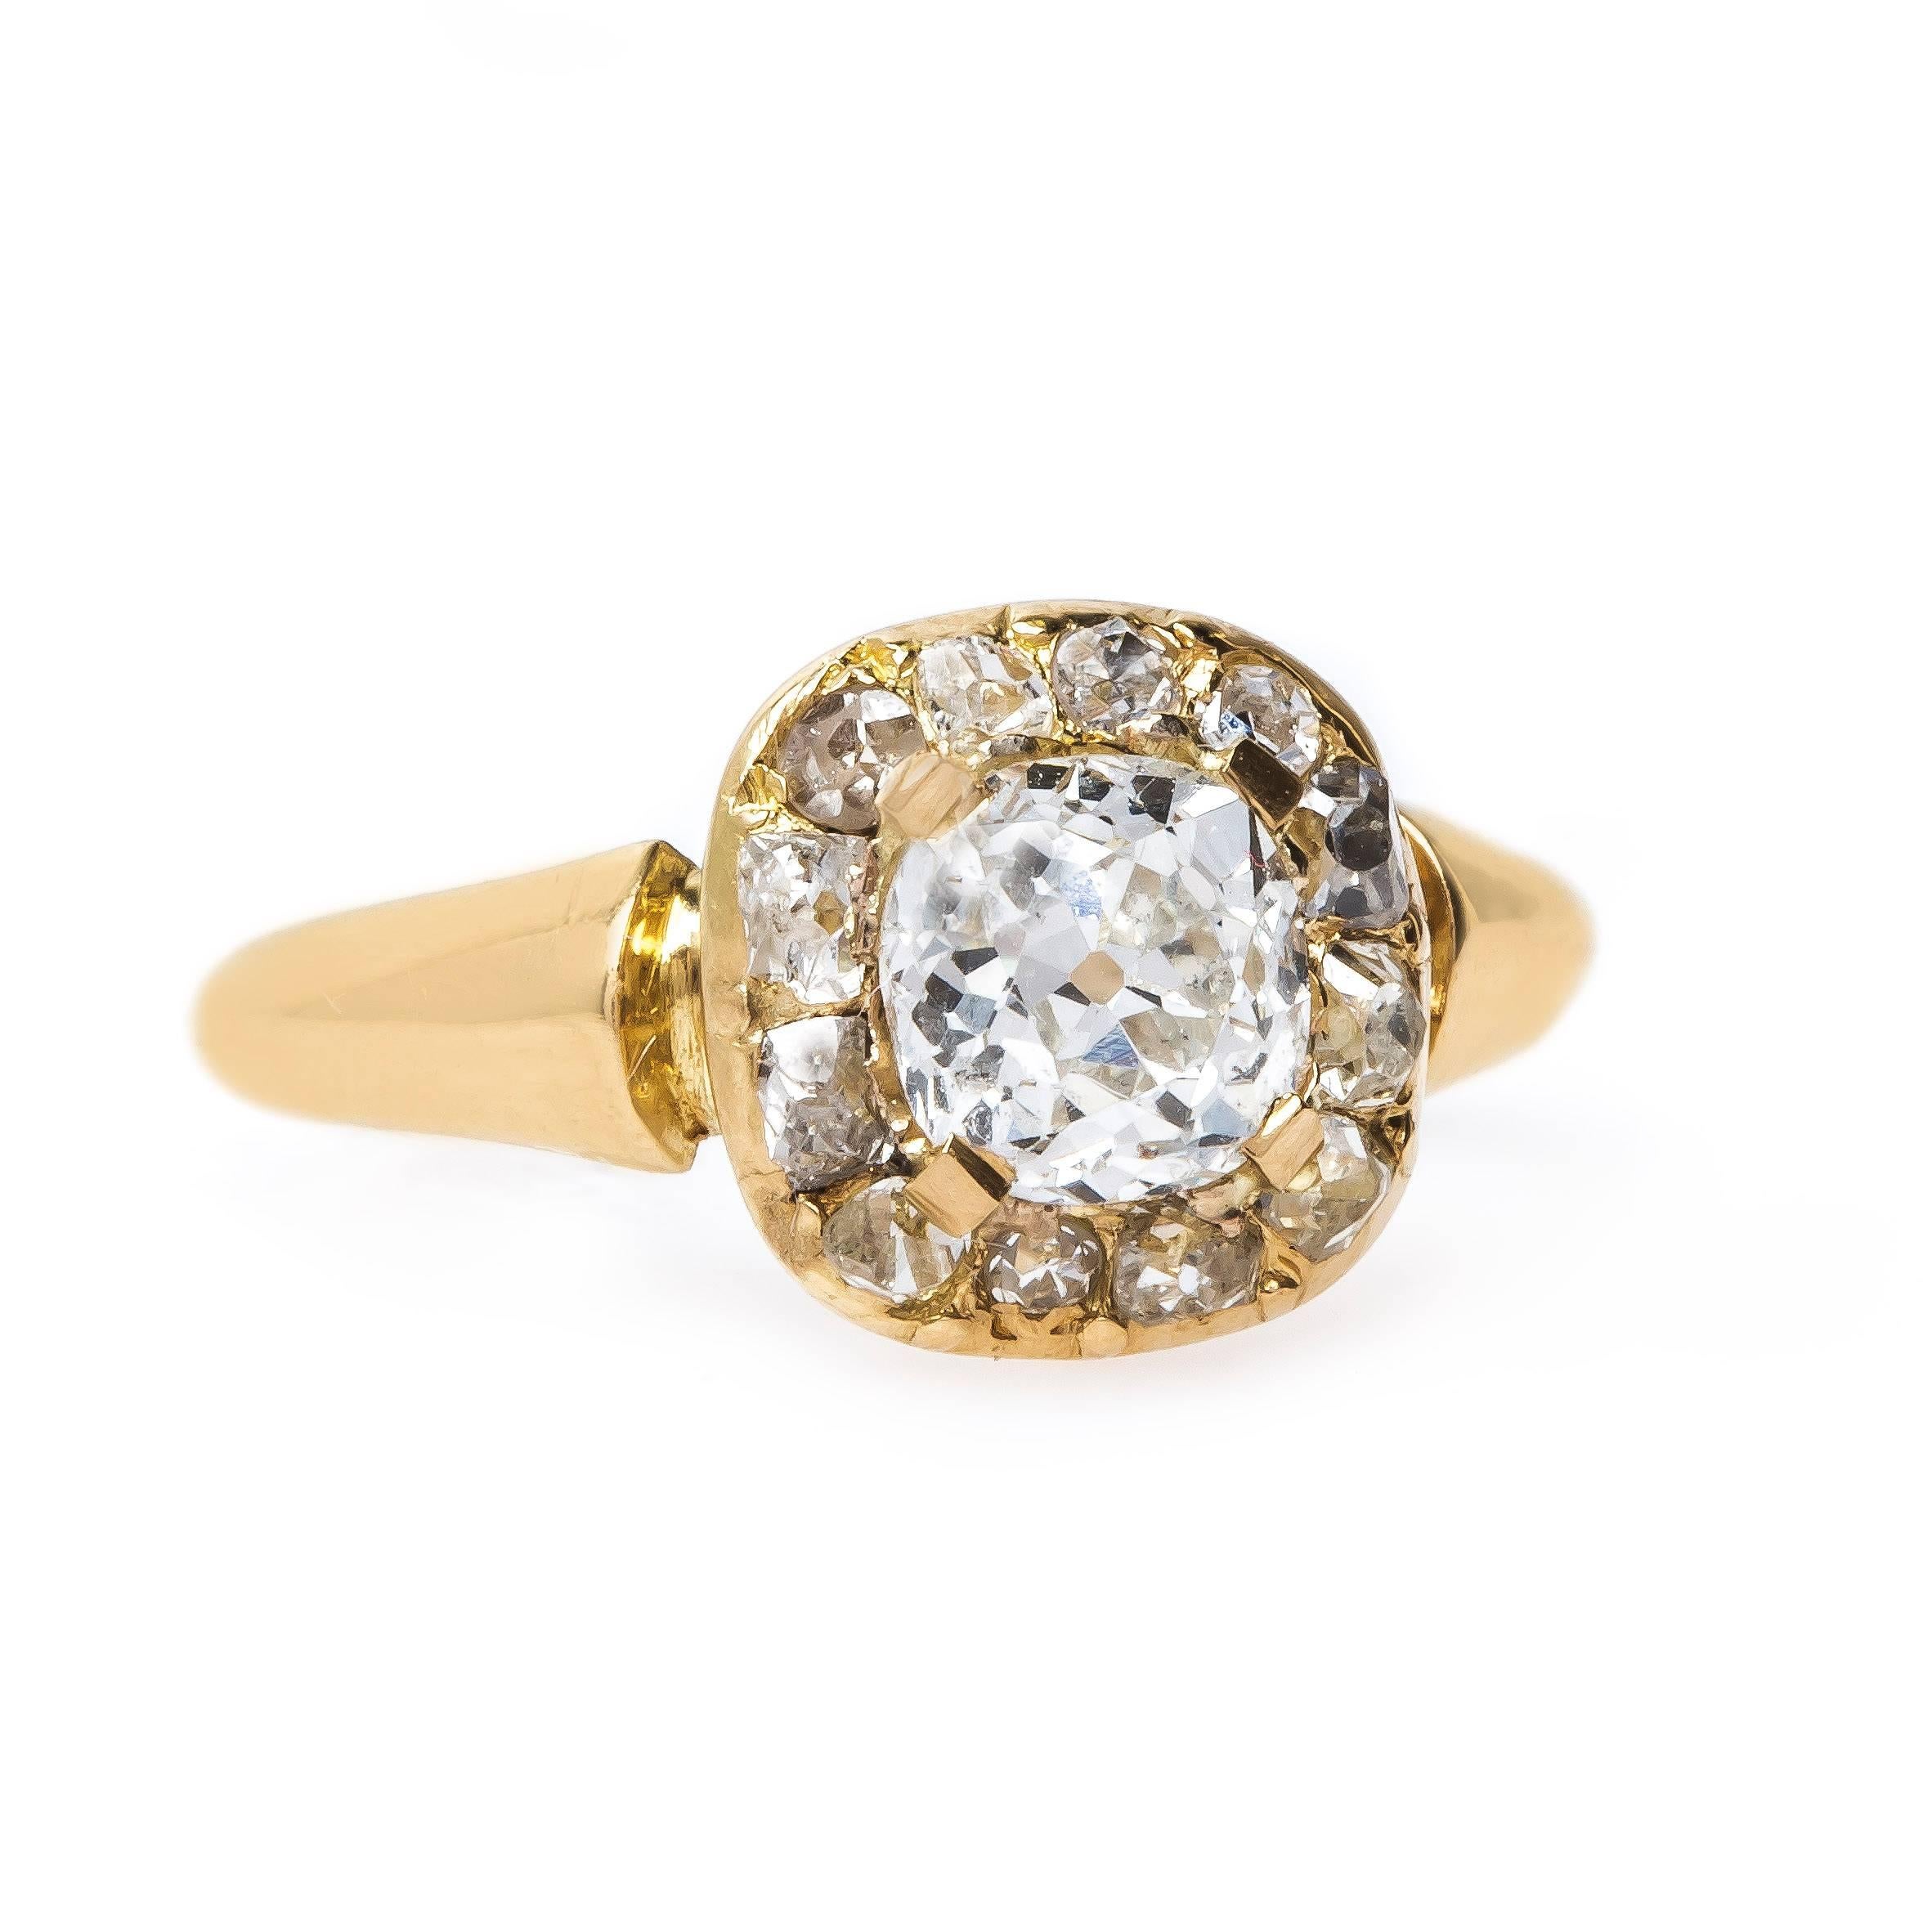 Tribeca is an alluring, one-of-a-kind Victorian era (circa 1890) 18k yellow gold antique engagement ring. This Victorian stunner centers a simple four-prong set 0.92ct EGL certified Old Mine Brilliant Cut diamond graded H color and SI1 clarity. A